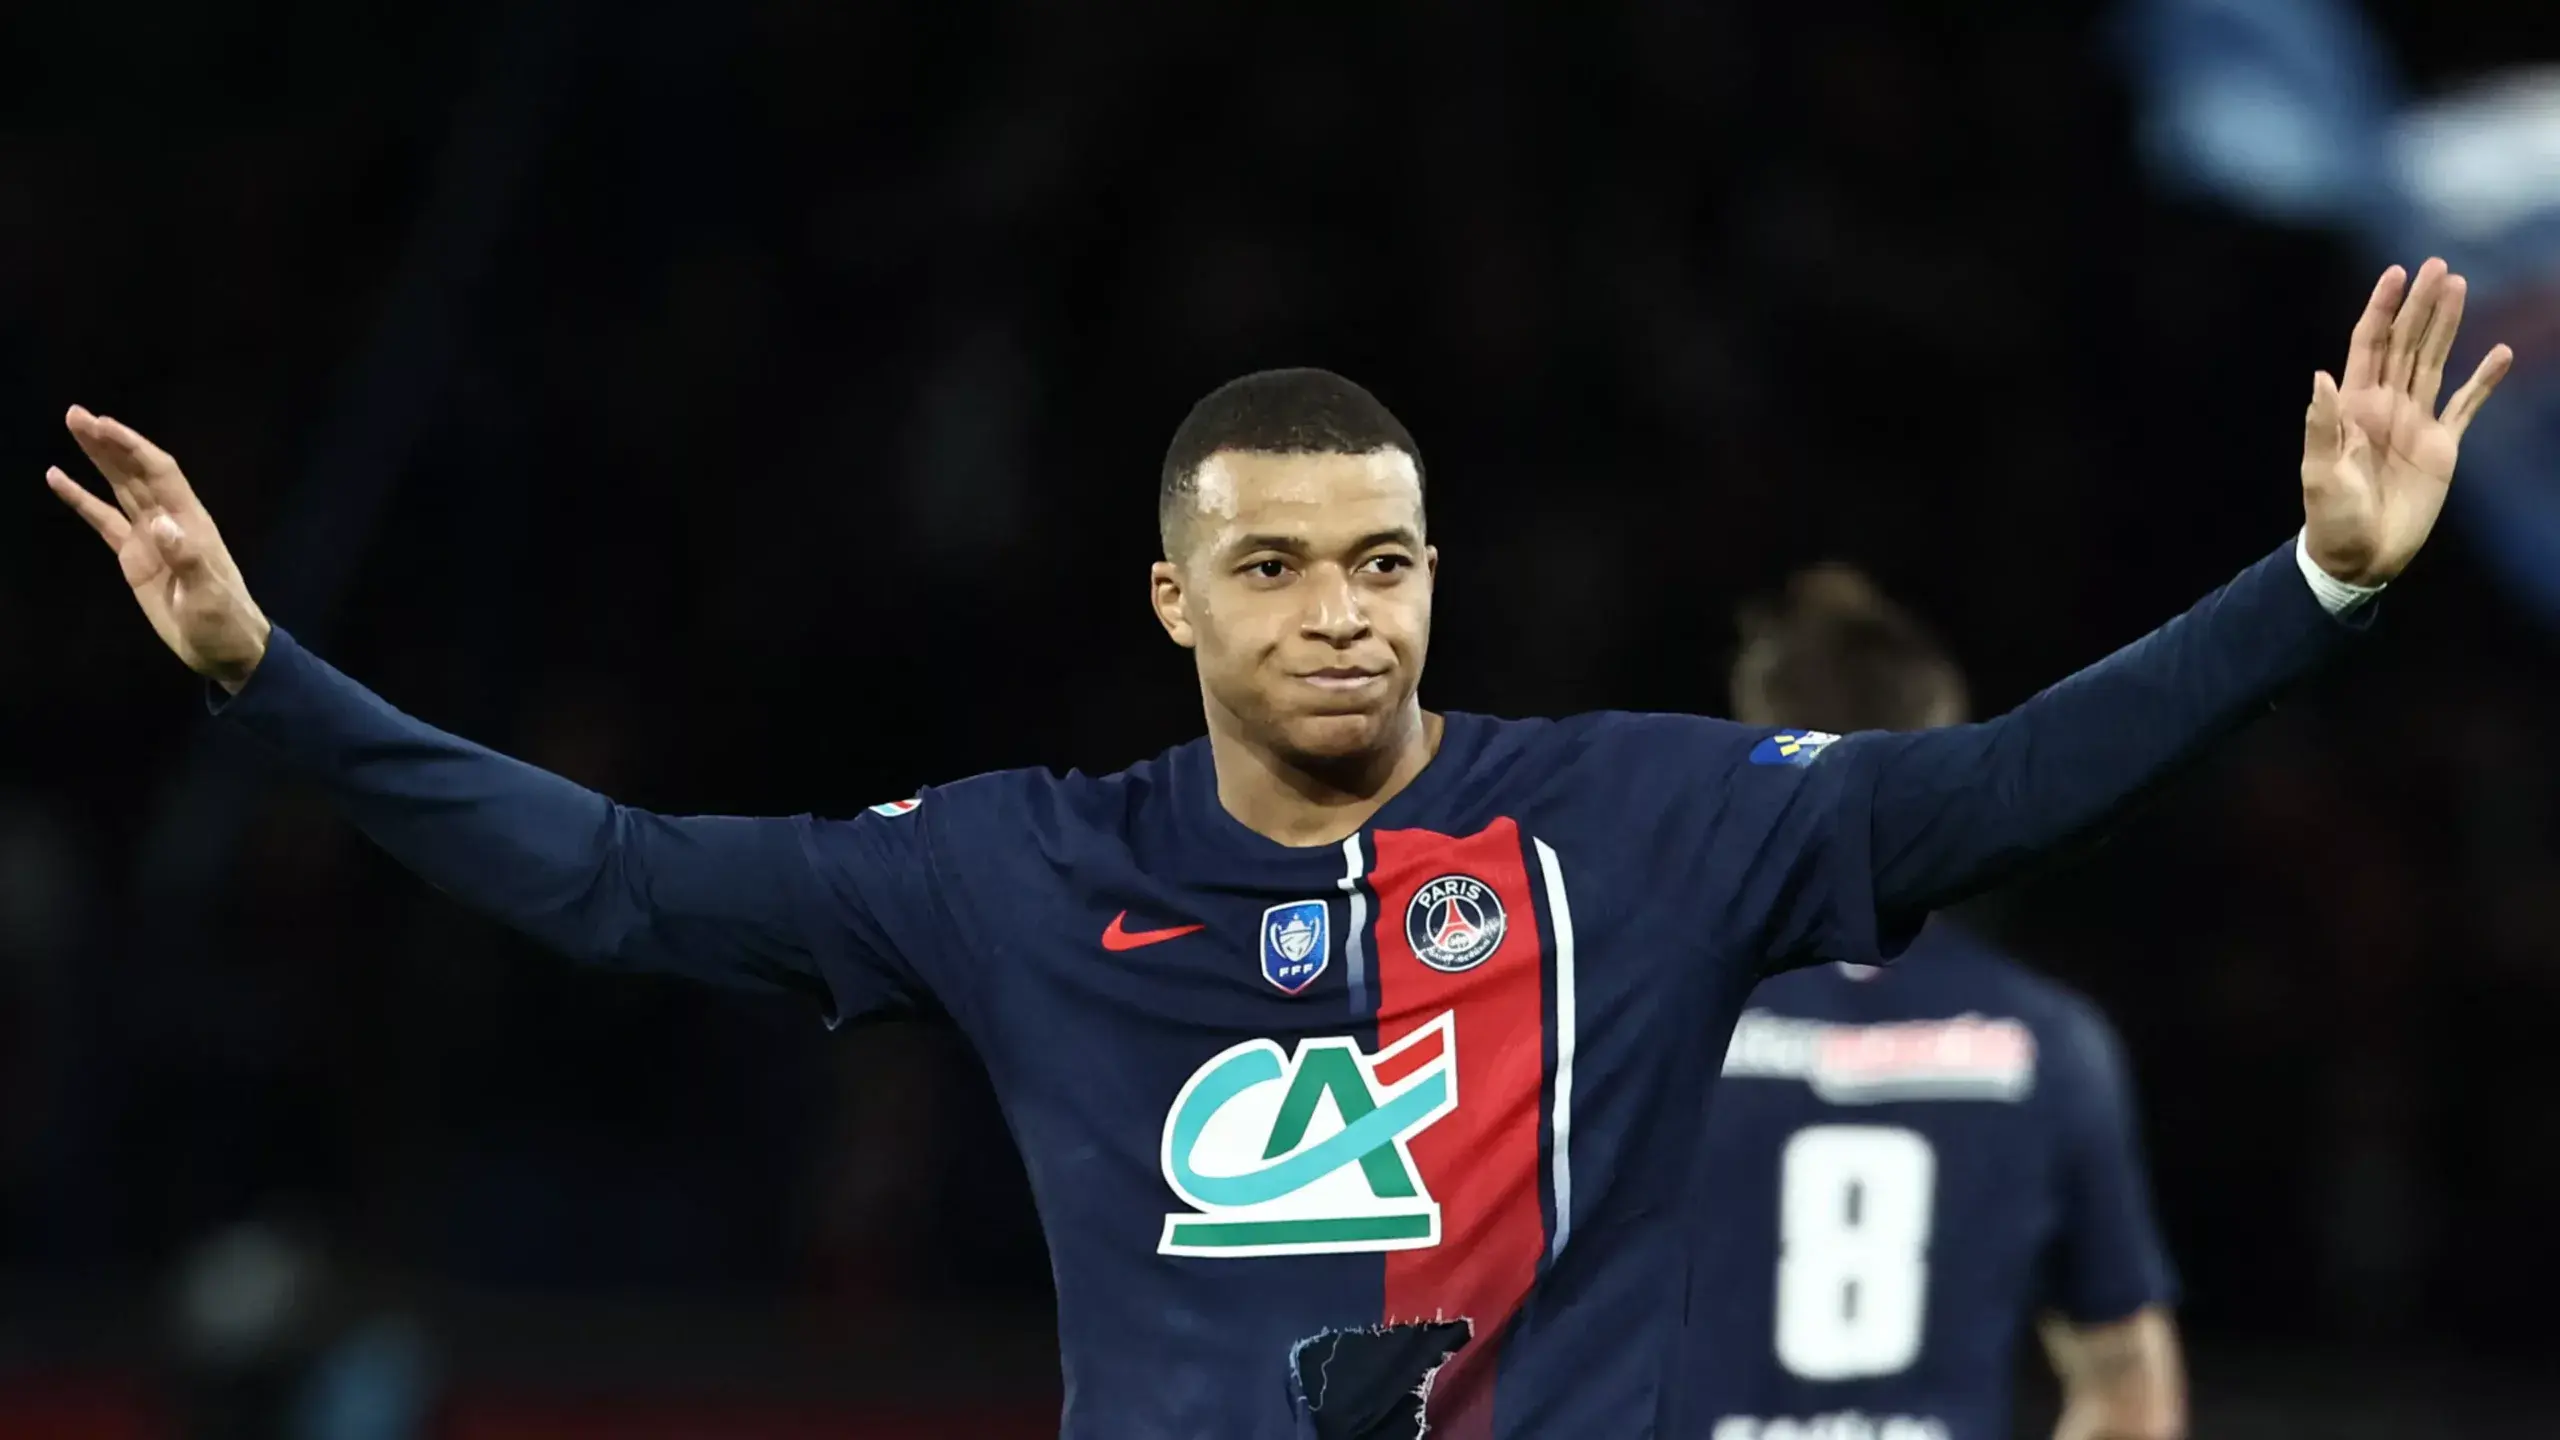 Barcelona's Missed Opportunity: The Kylian Mbappe Saga That Could Have Changed History